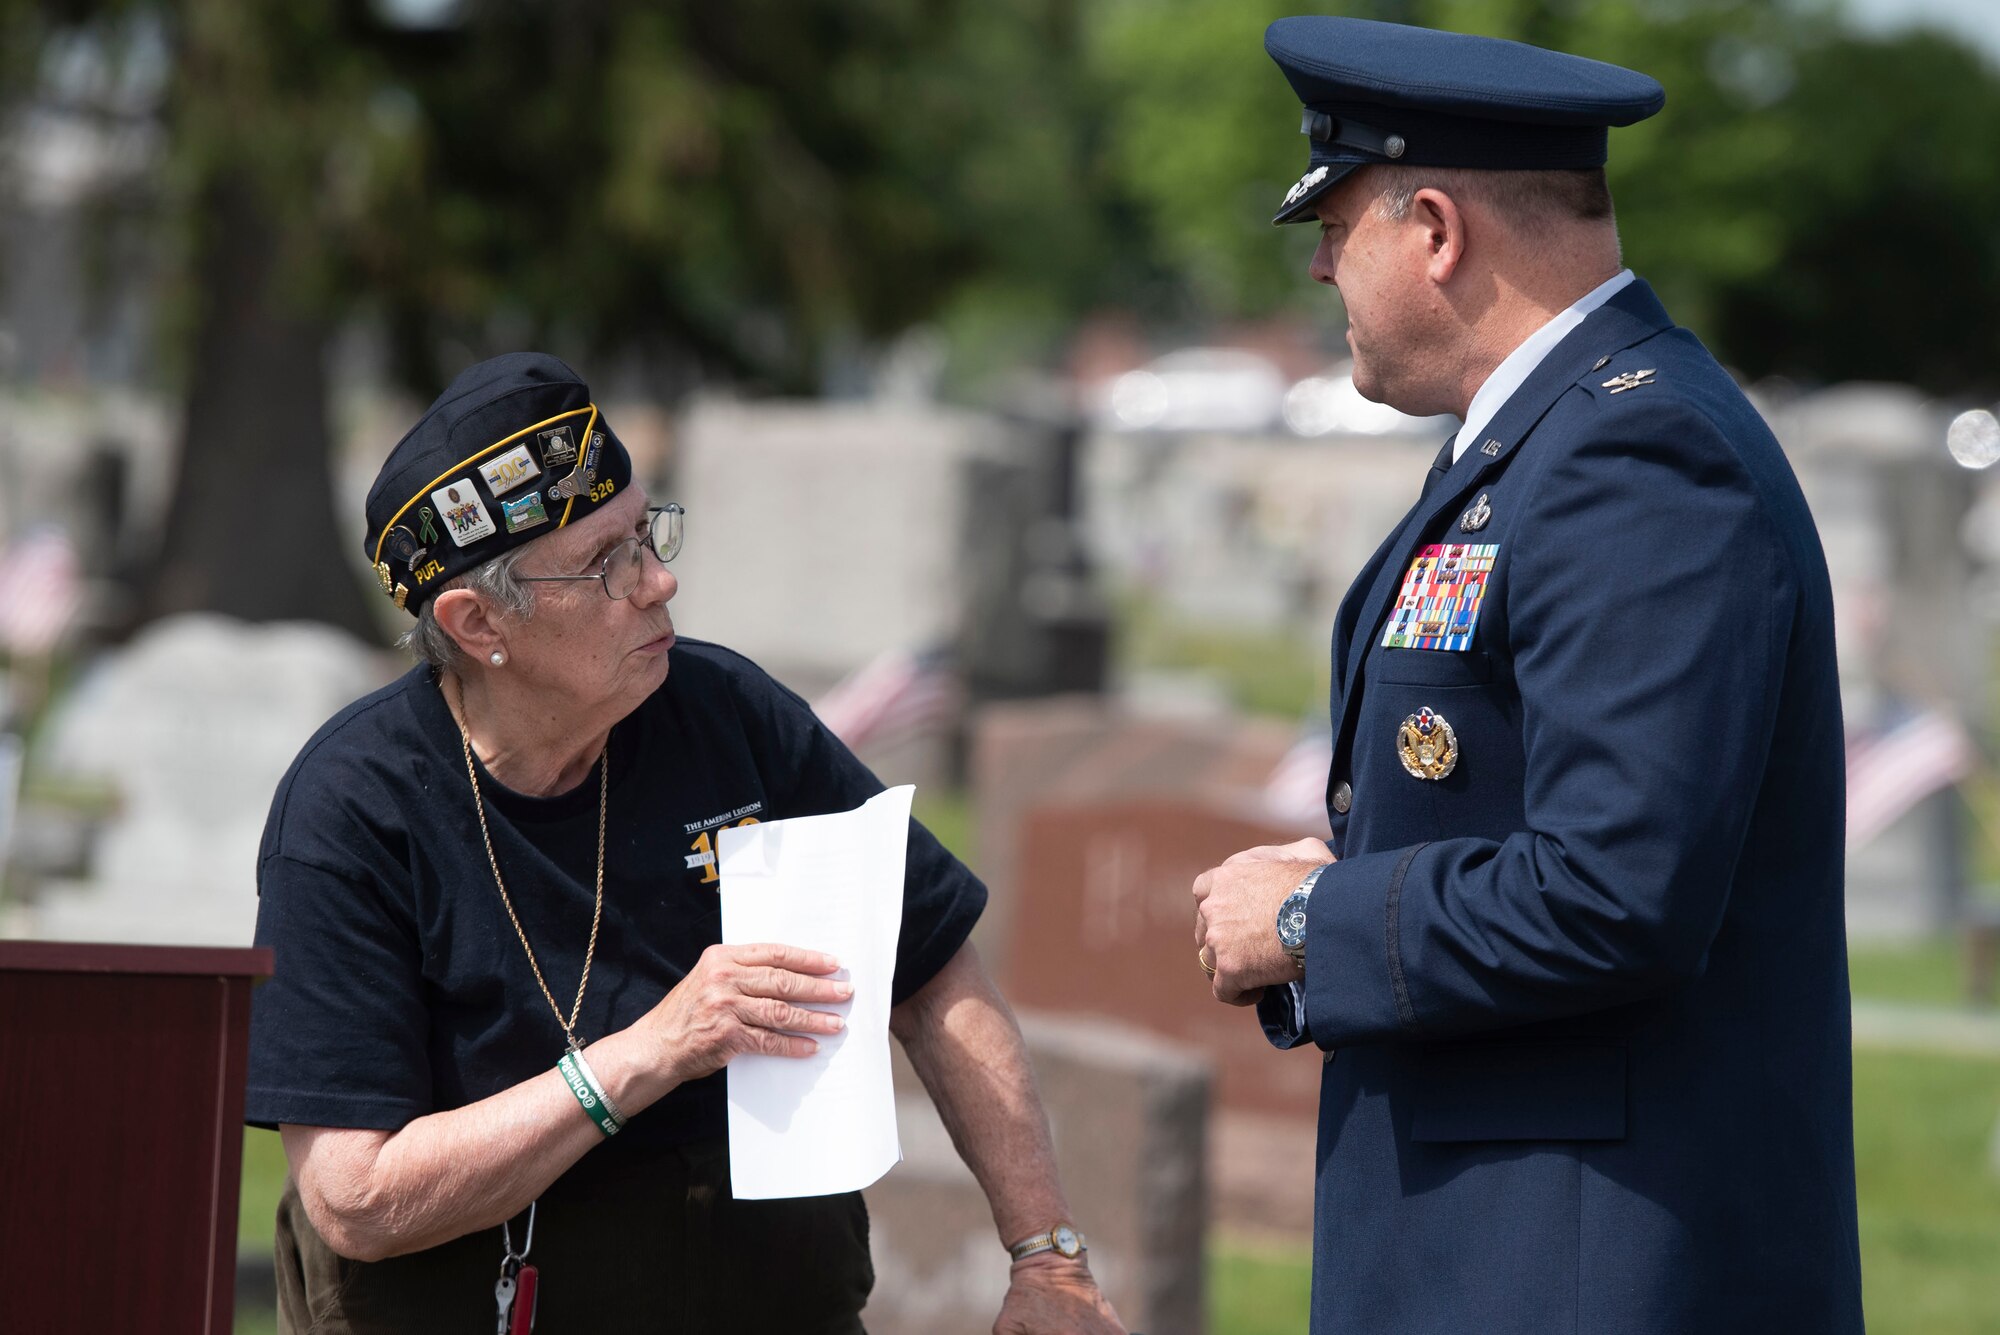 U.S. Air Force Col. Patrick Miller, 88th Air Base Wing and Wright-Patterson Air Force Base, Ohio, talks Anne Foster, American Legion Post 526 historian and Air Force veteran, prior to a Memorial Day ceremony in Fairborn, Ohio, May 31, 2021. Established in 1971, Memorial Day is an official federal holiday meant to allow people to honor the men and women who have died while on duty with the U.S. Military. (U.S. Air Force photo by Wesley Farnsworth)